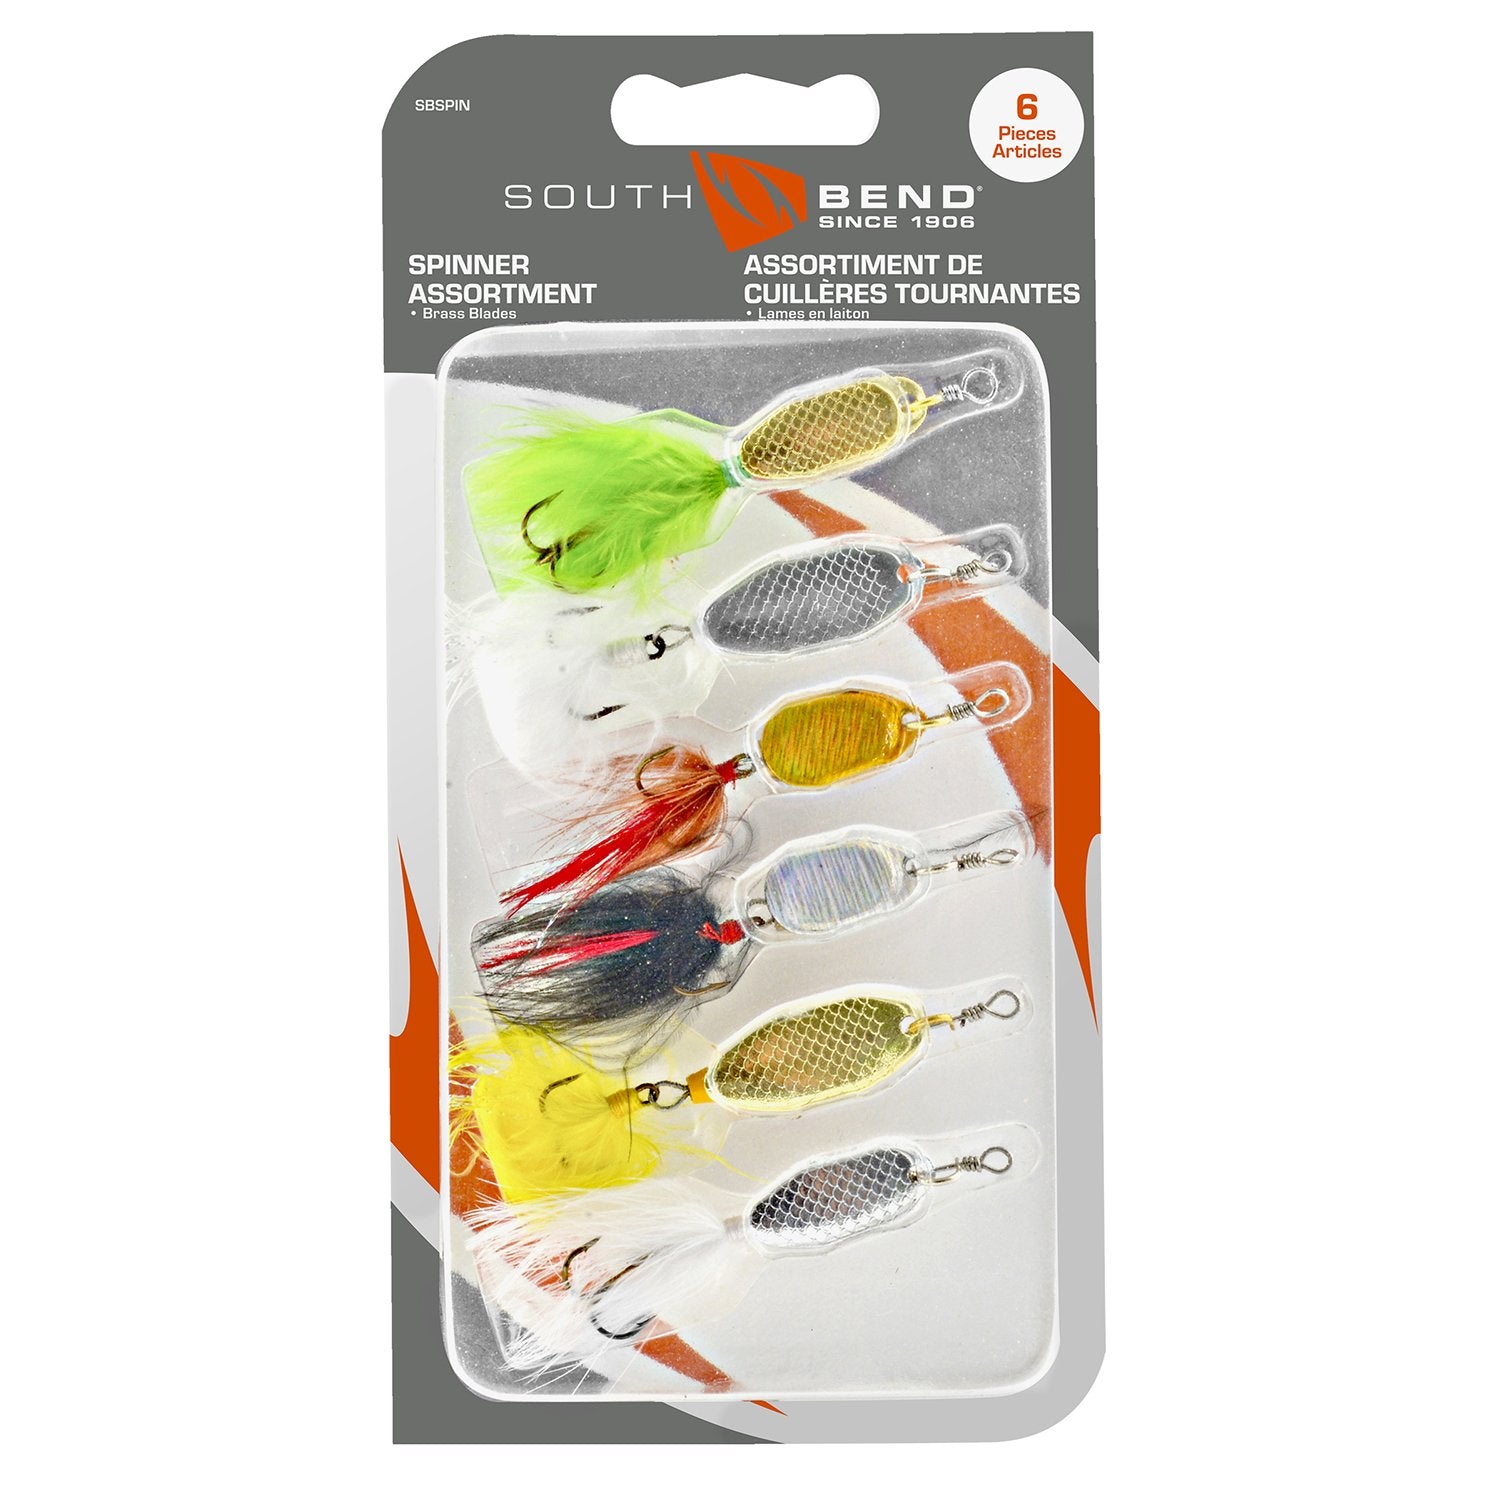 Crappie Spinner  screwylewylures